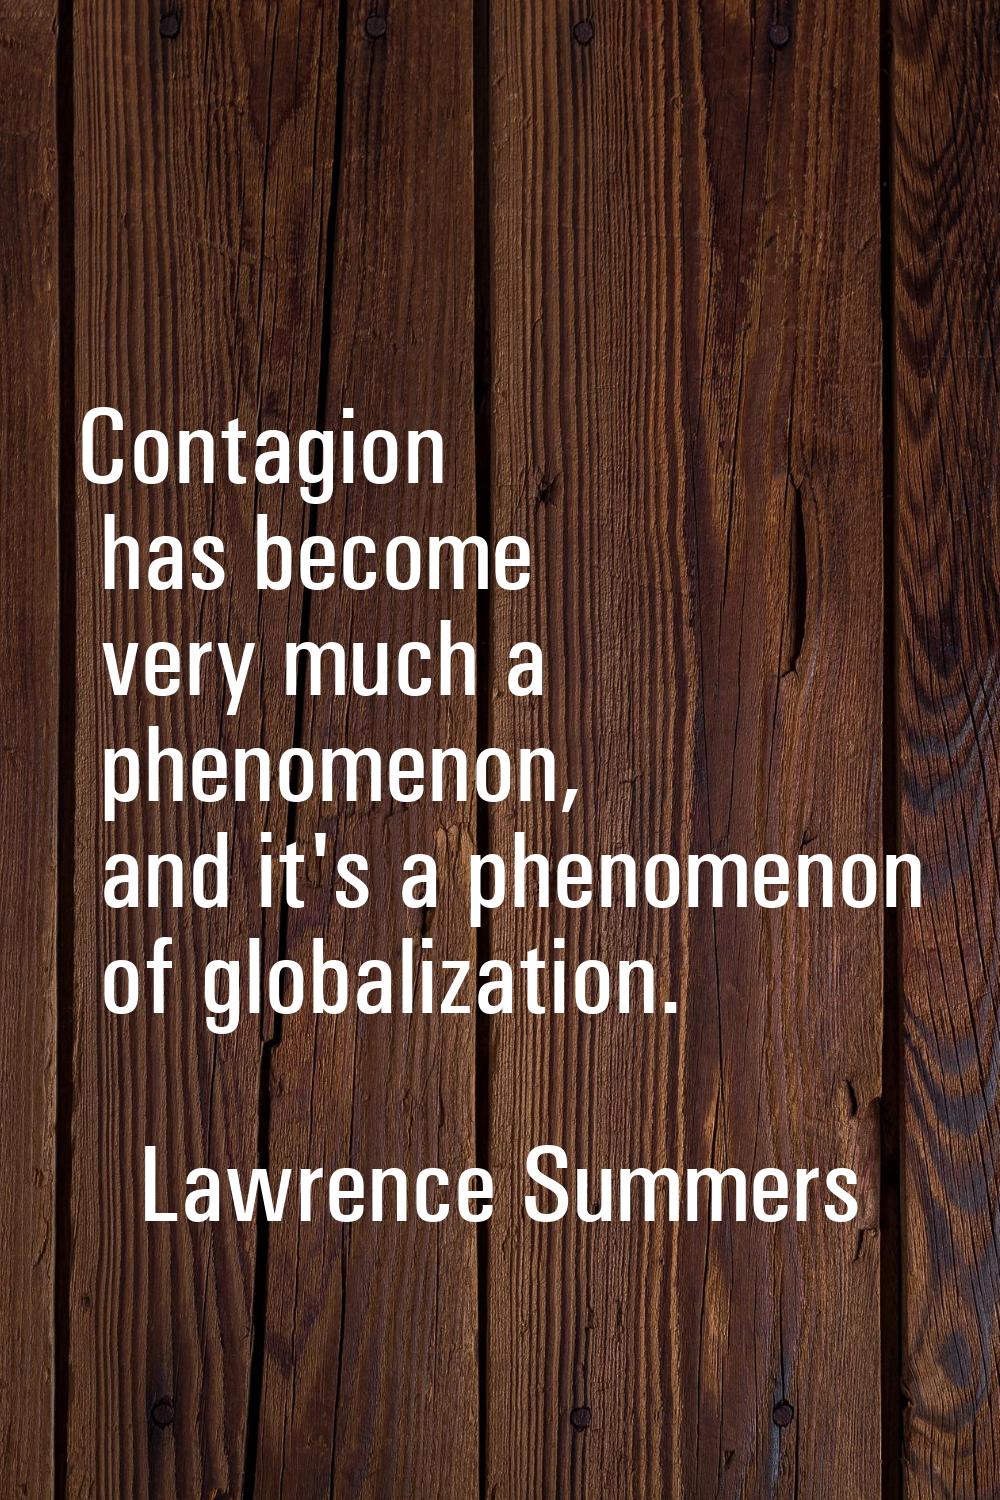 Contagion has become very much a phenomenon, and it's a phenomenon of globalization.